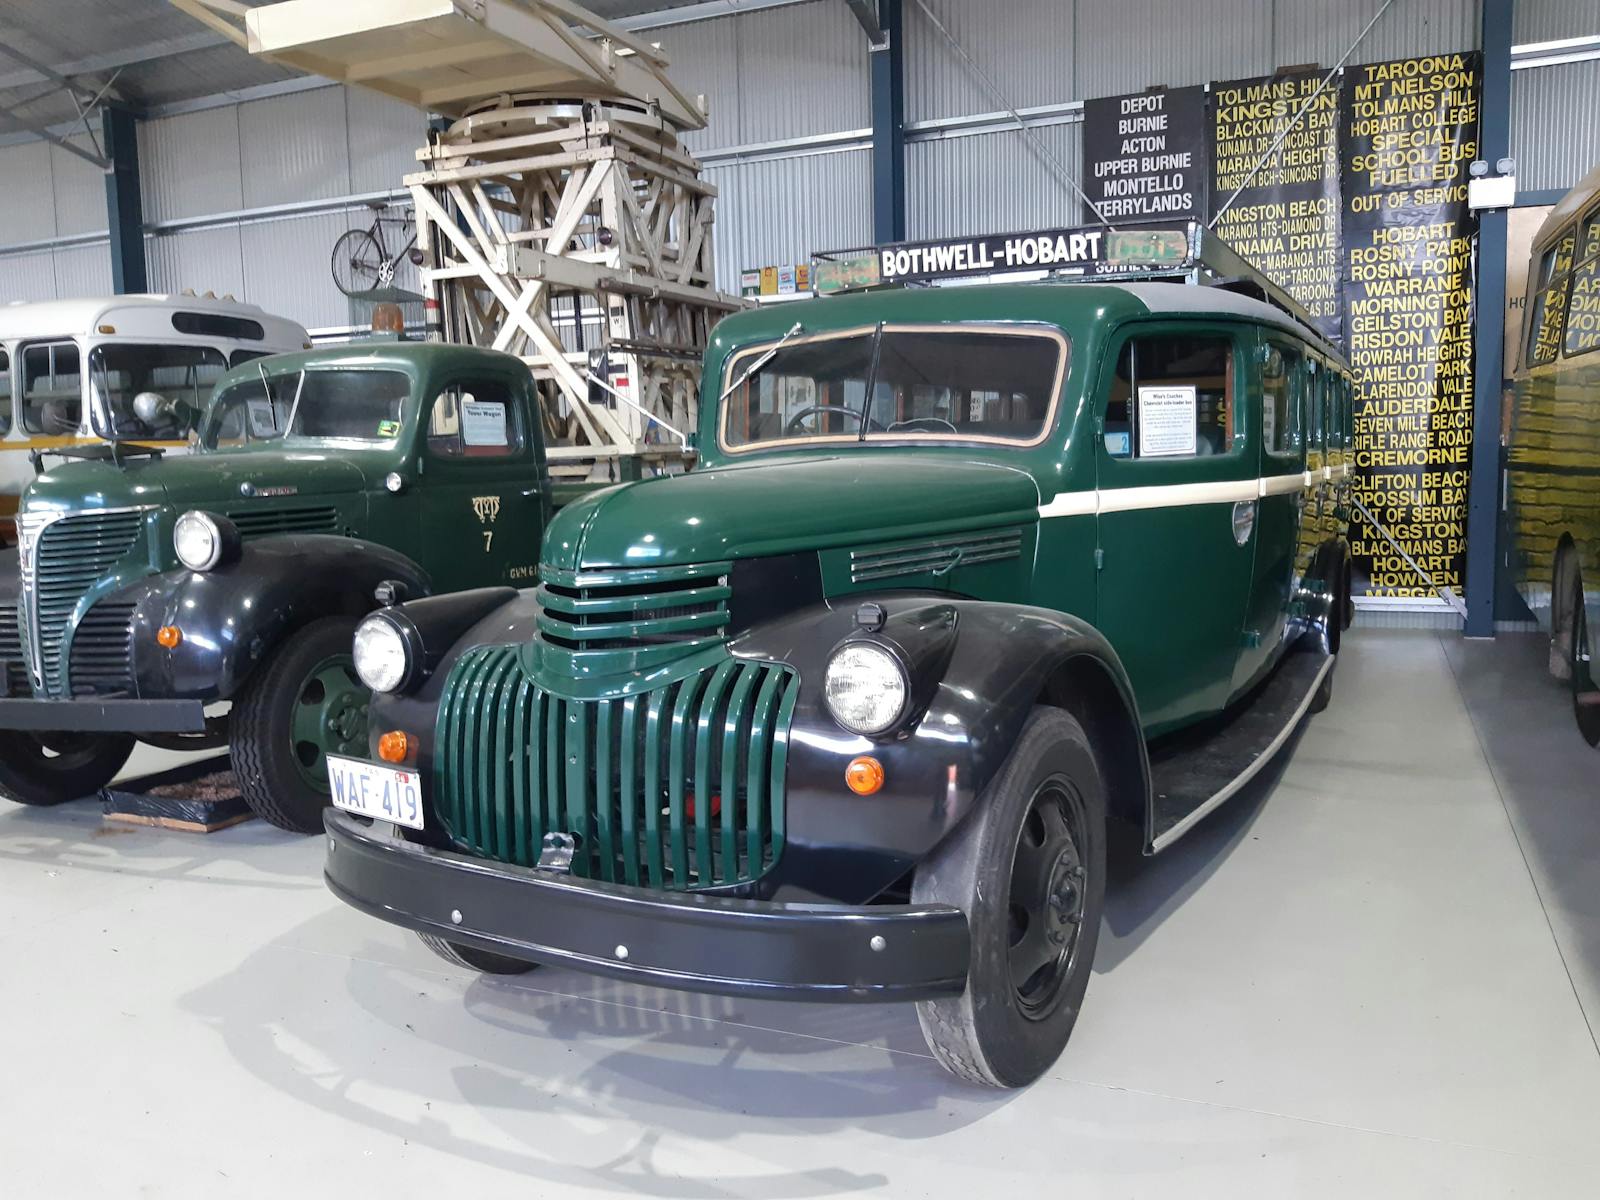 The Museum has a small collection of petrol & diesel buses of which the 1943 Chevolet is the oldest.